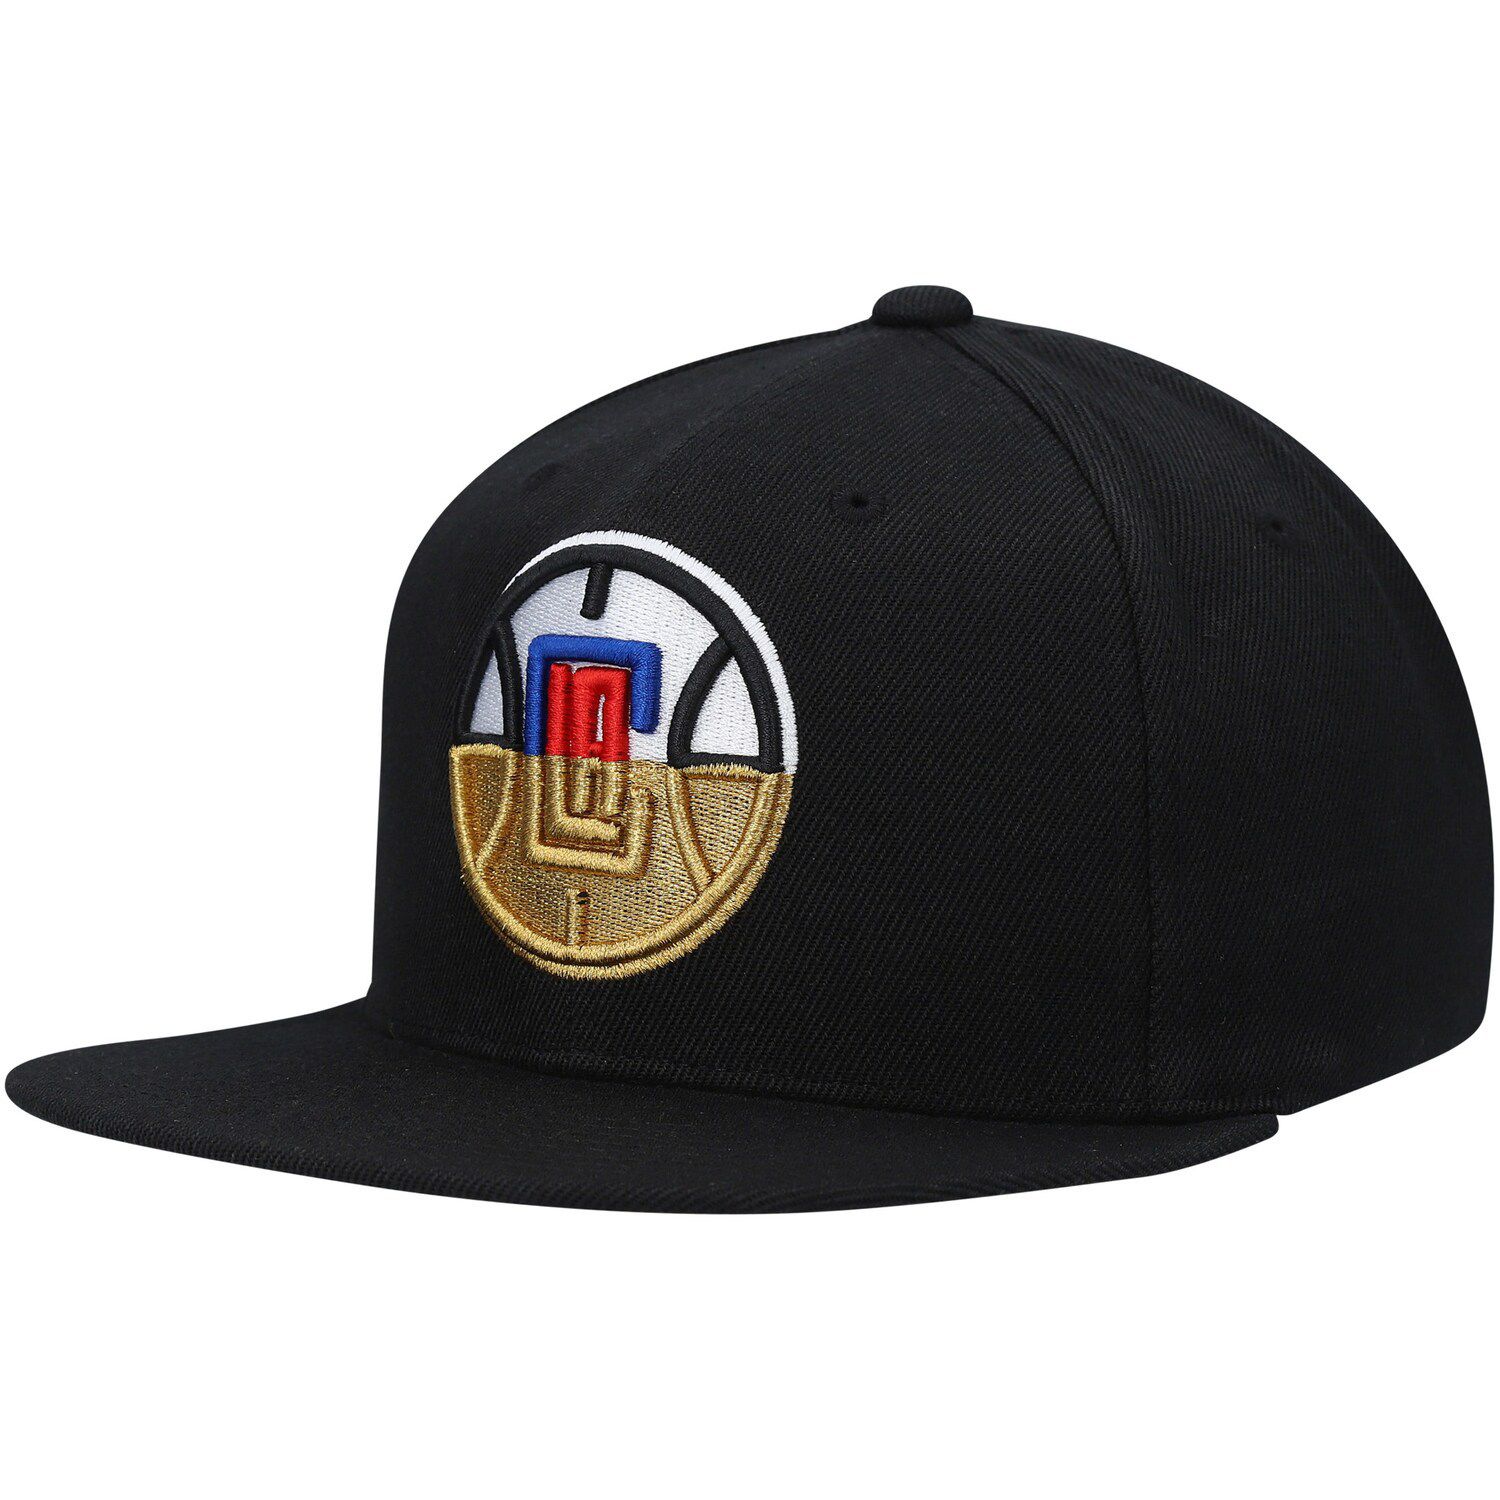 Image for Unbranded Men's Mitchell & Ness Black LA Clippers Gold Dip Down Snapback Hat at Kohl's.